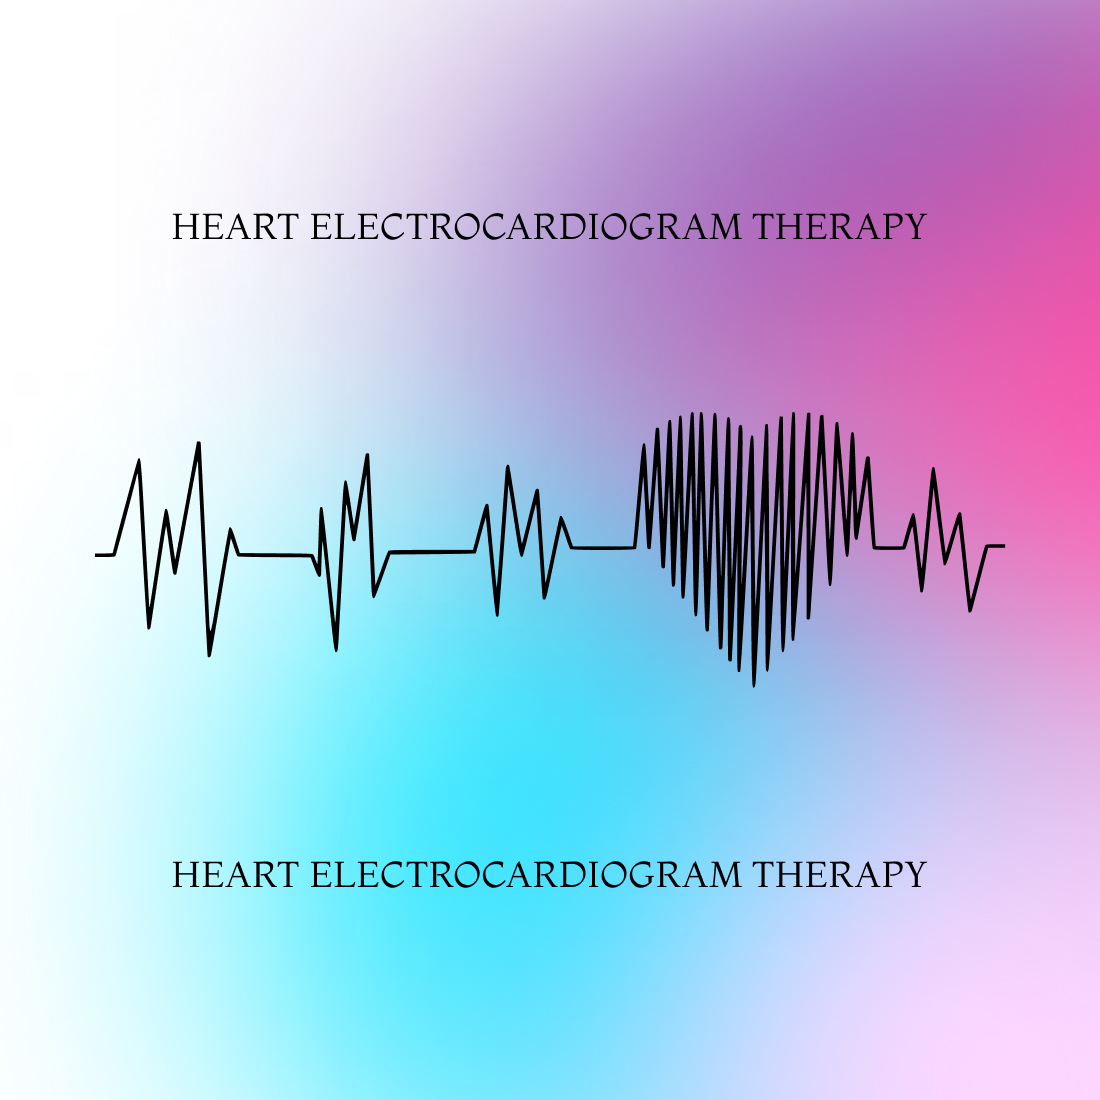 It Heart Electrocardiogram Therapy - Colorful Image.